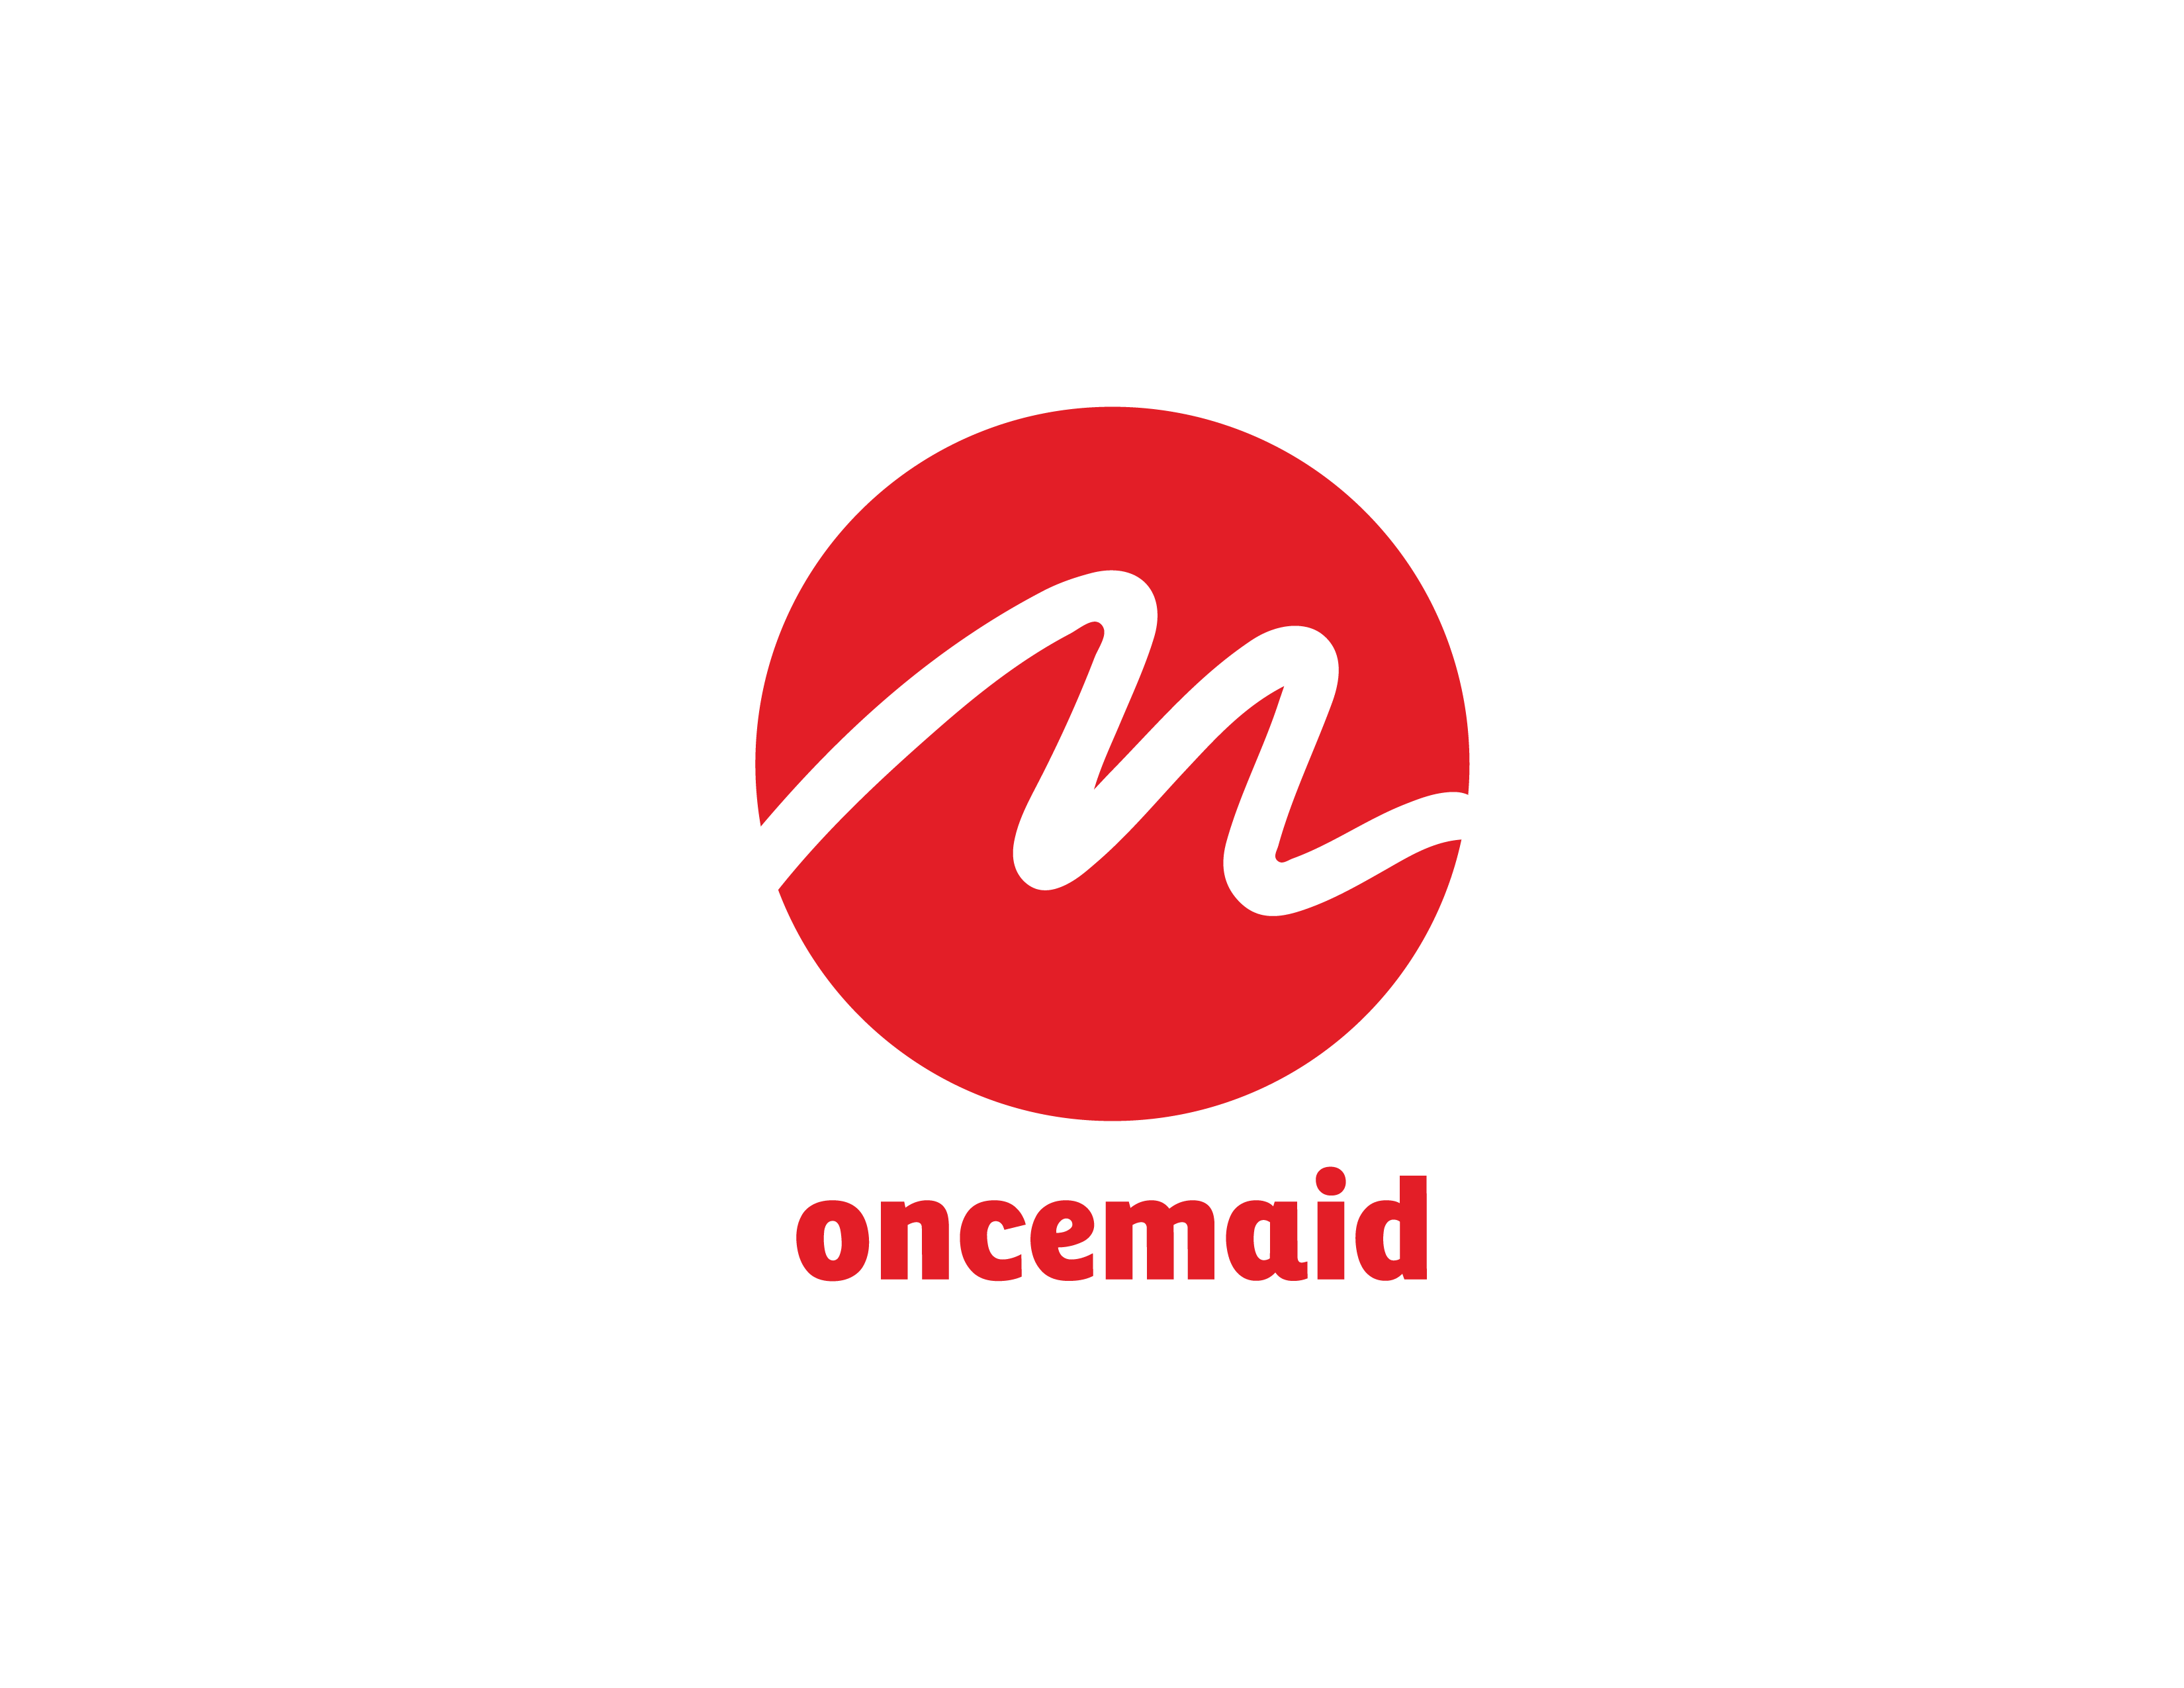 Logo oncemaid